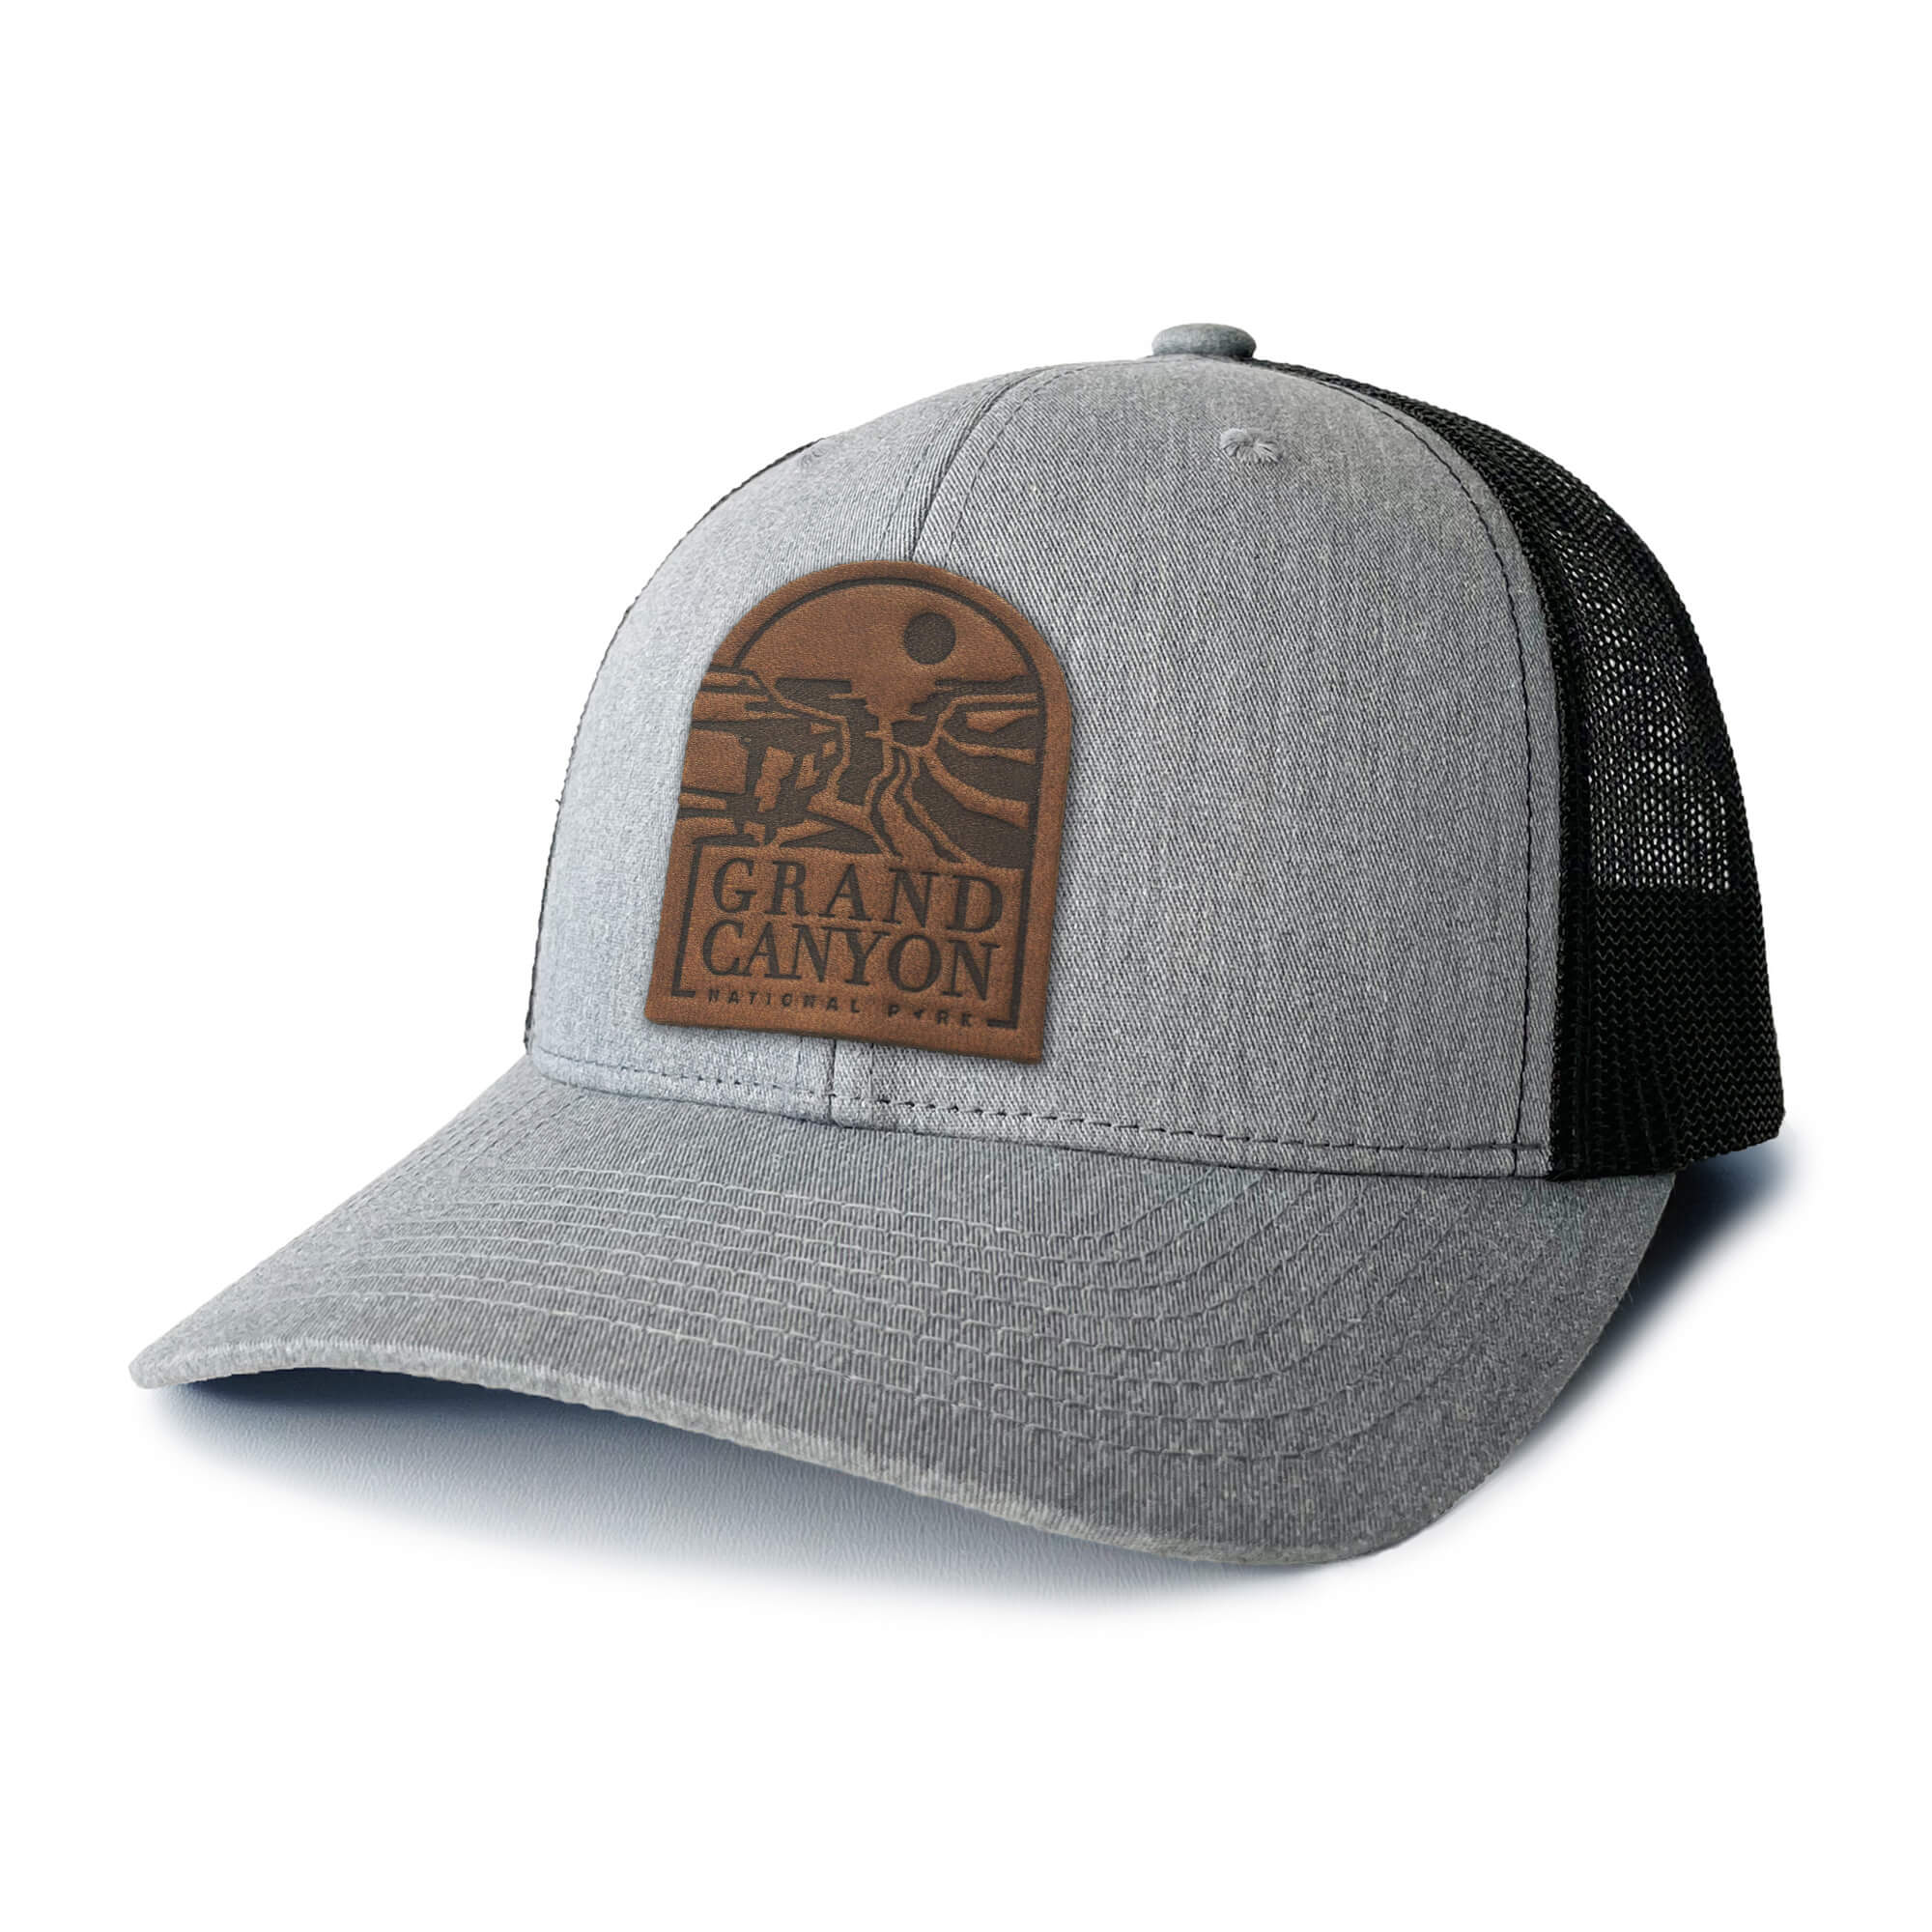 Heather Grey and white trucker hat with full-grain leather patch of Grand Canyon National Park | BLACK-007-004, CHARC-007-004, NAVY-007-004, HGREY-007-004, MOSS-007-004, BROWN-007-004